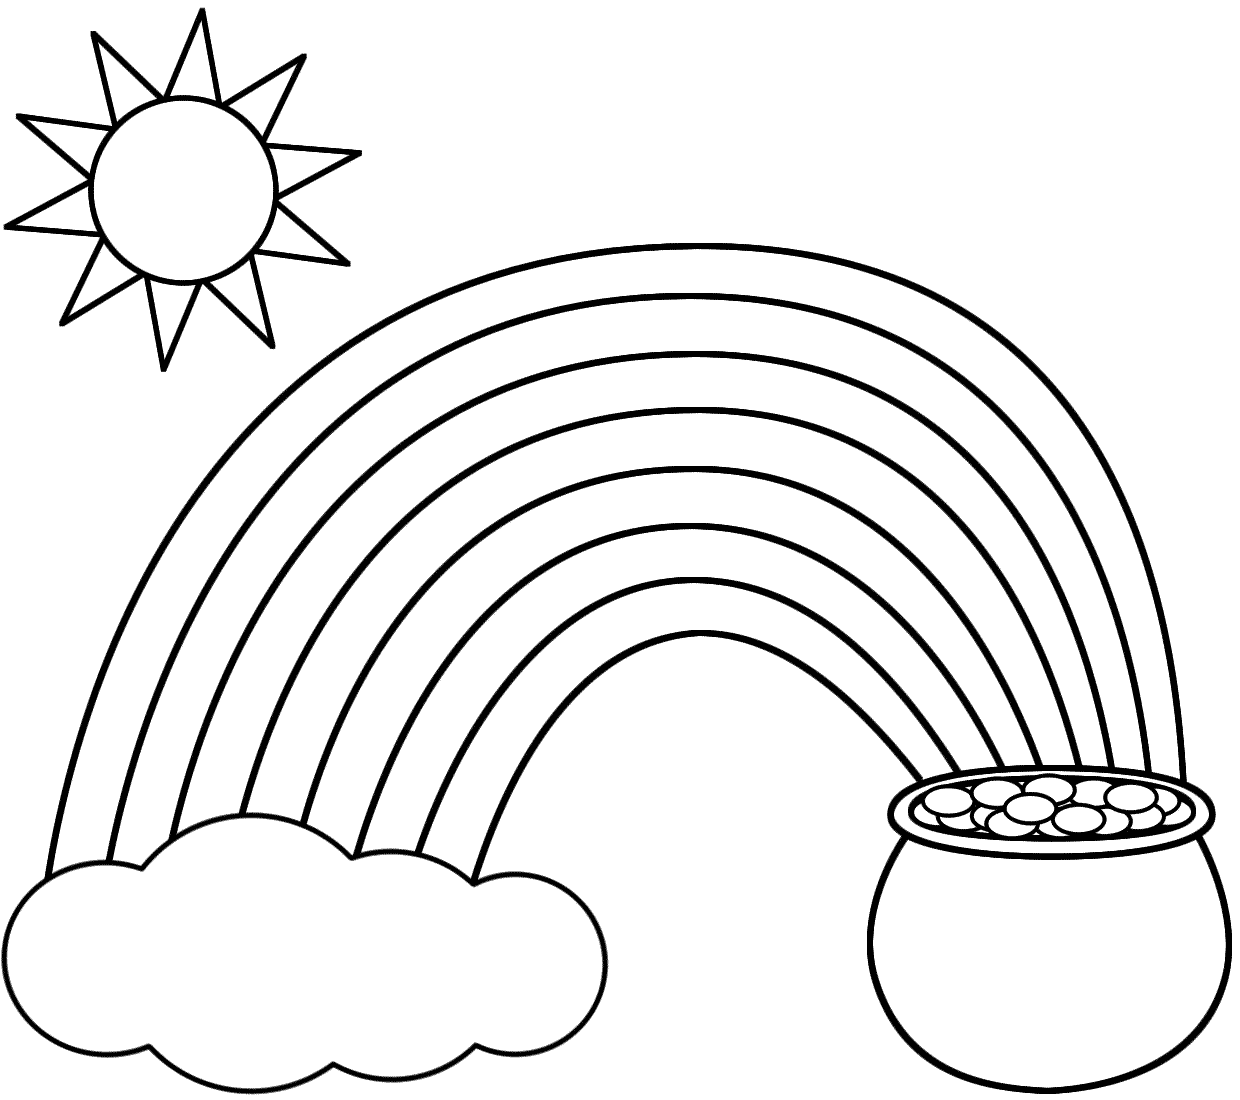 Preschool Coloring Pages Of Rainbows   Coloring Home